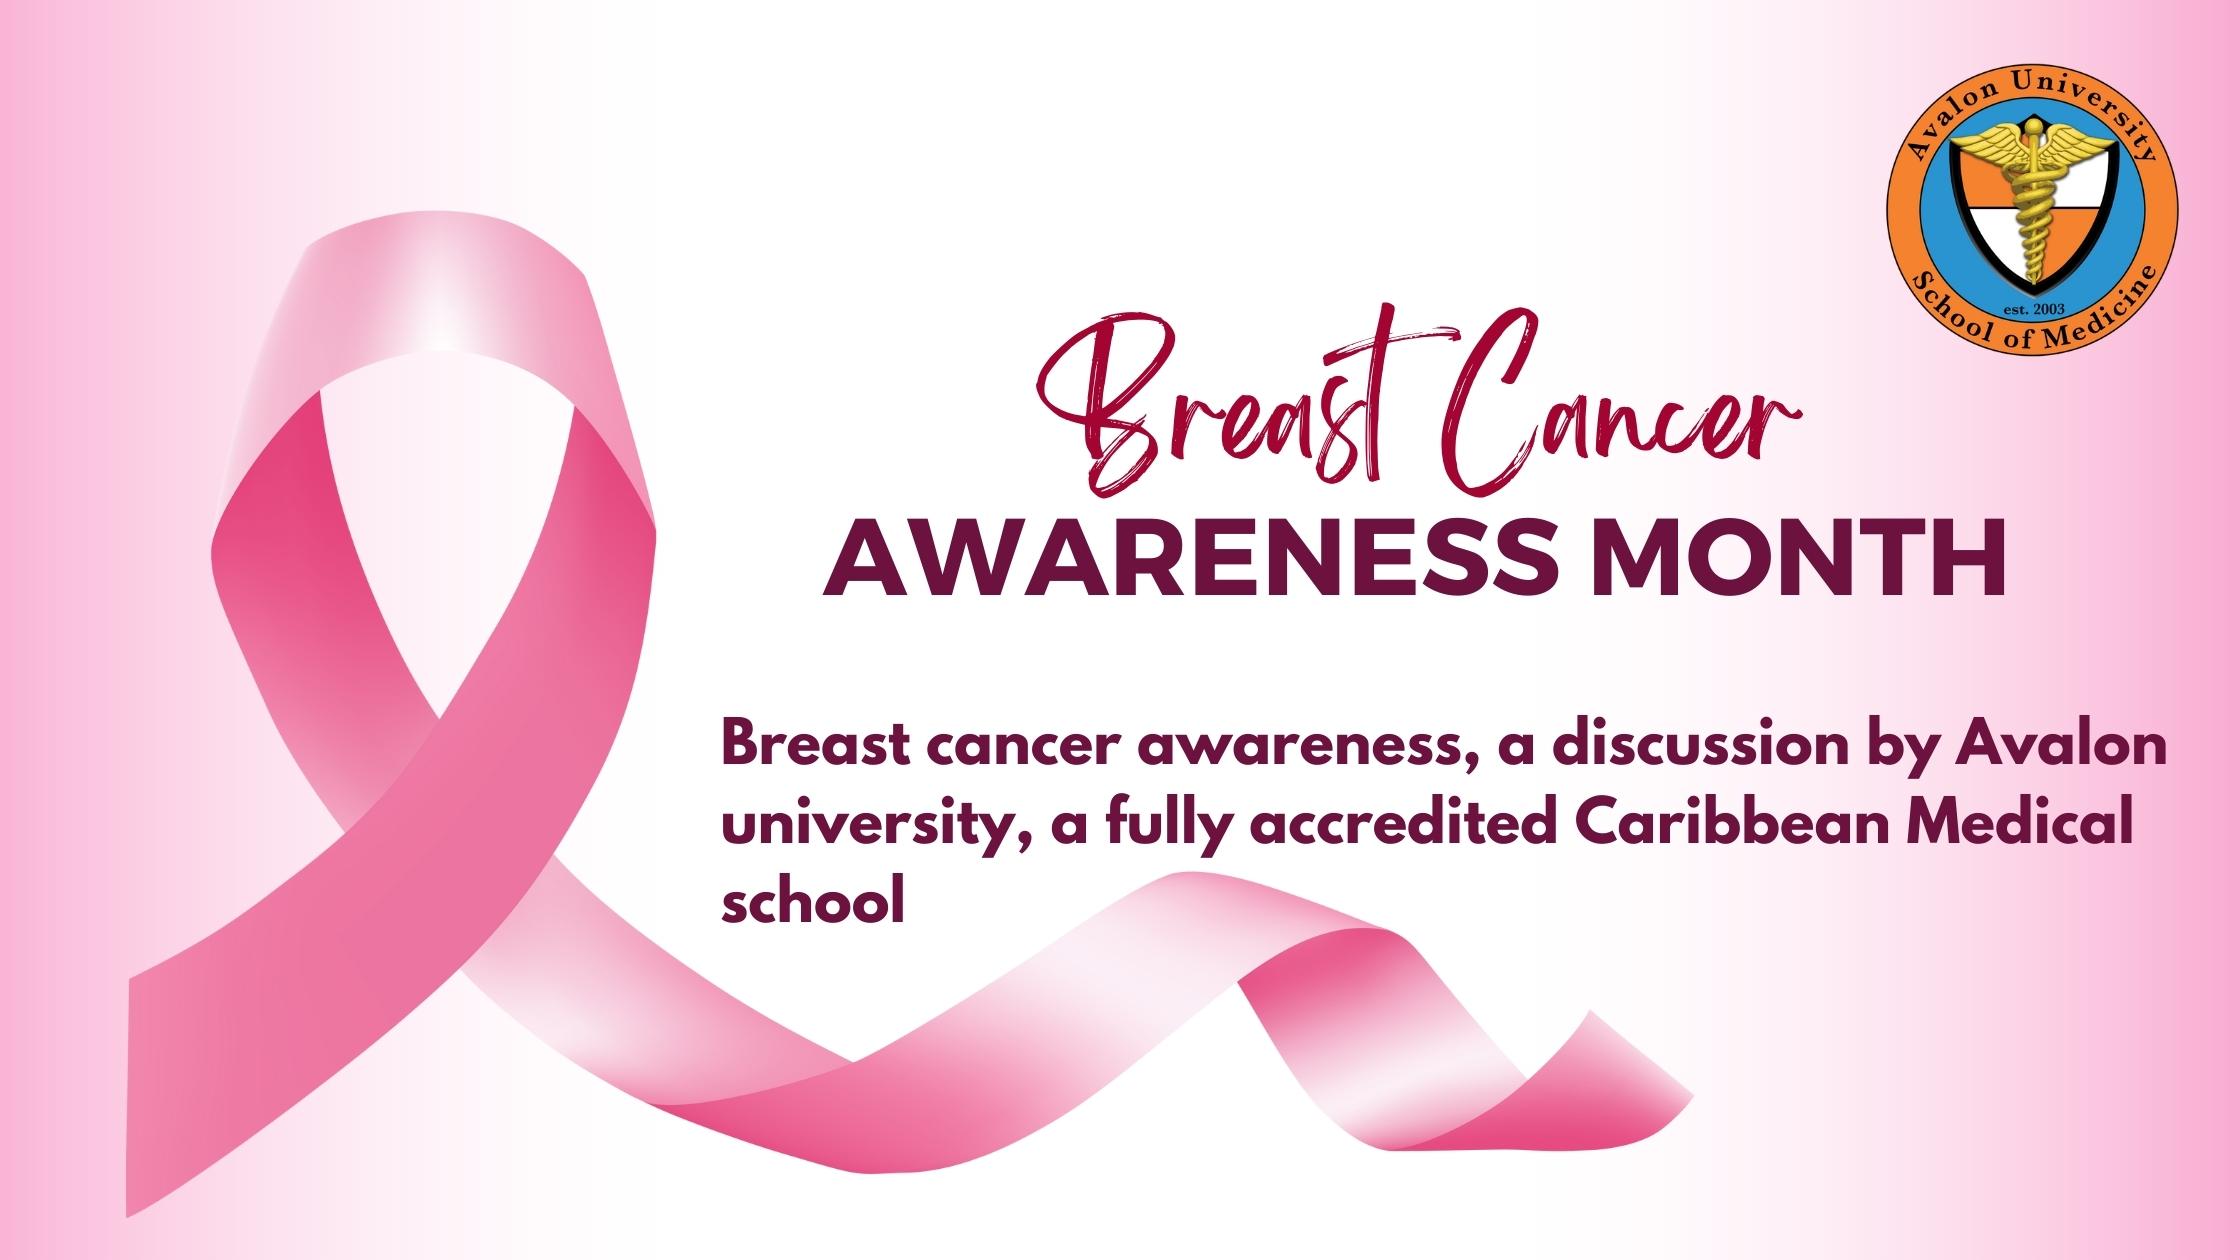 Fully Accredited Caribbean Medical School, Avalon University Discusses Breast Cancer Awareness